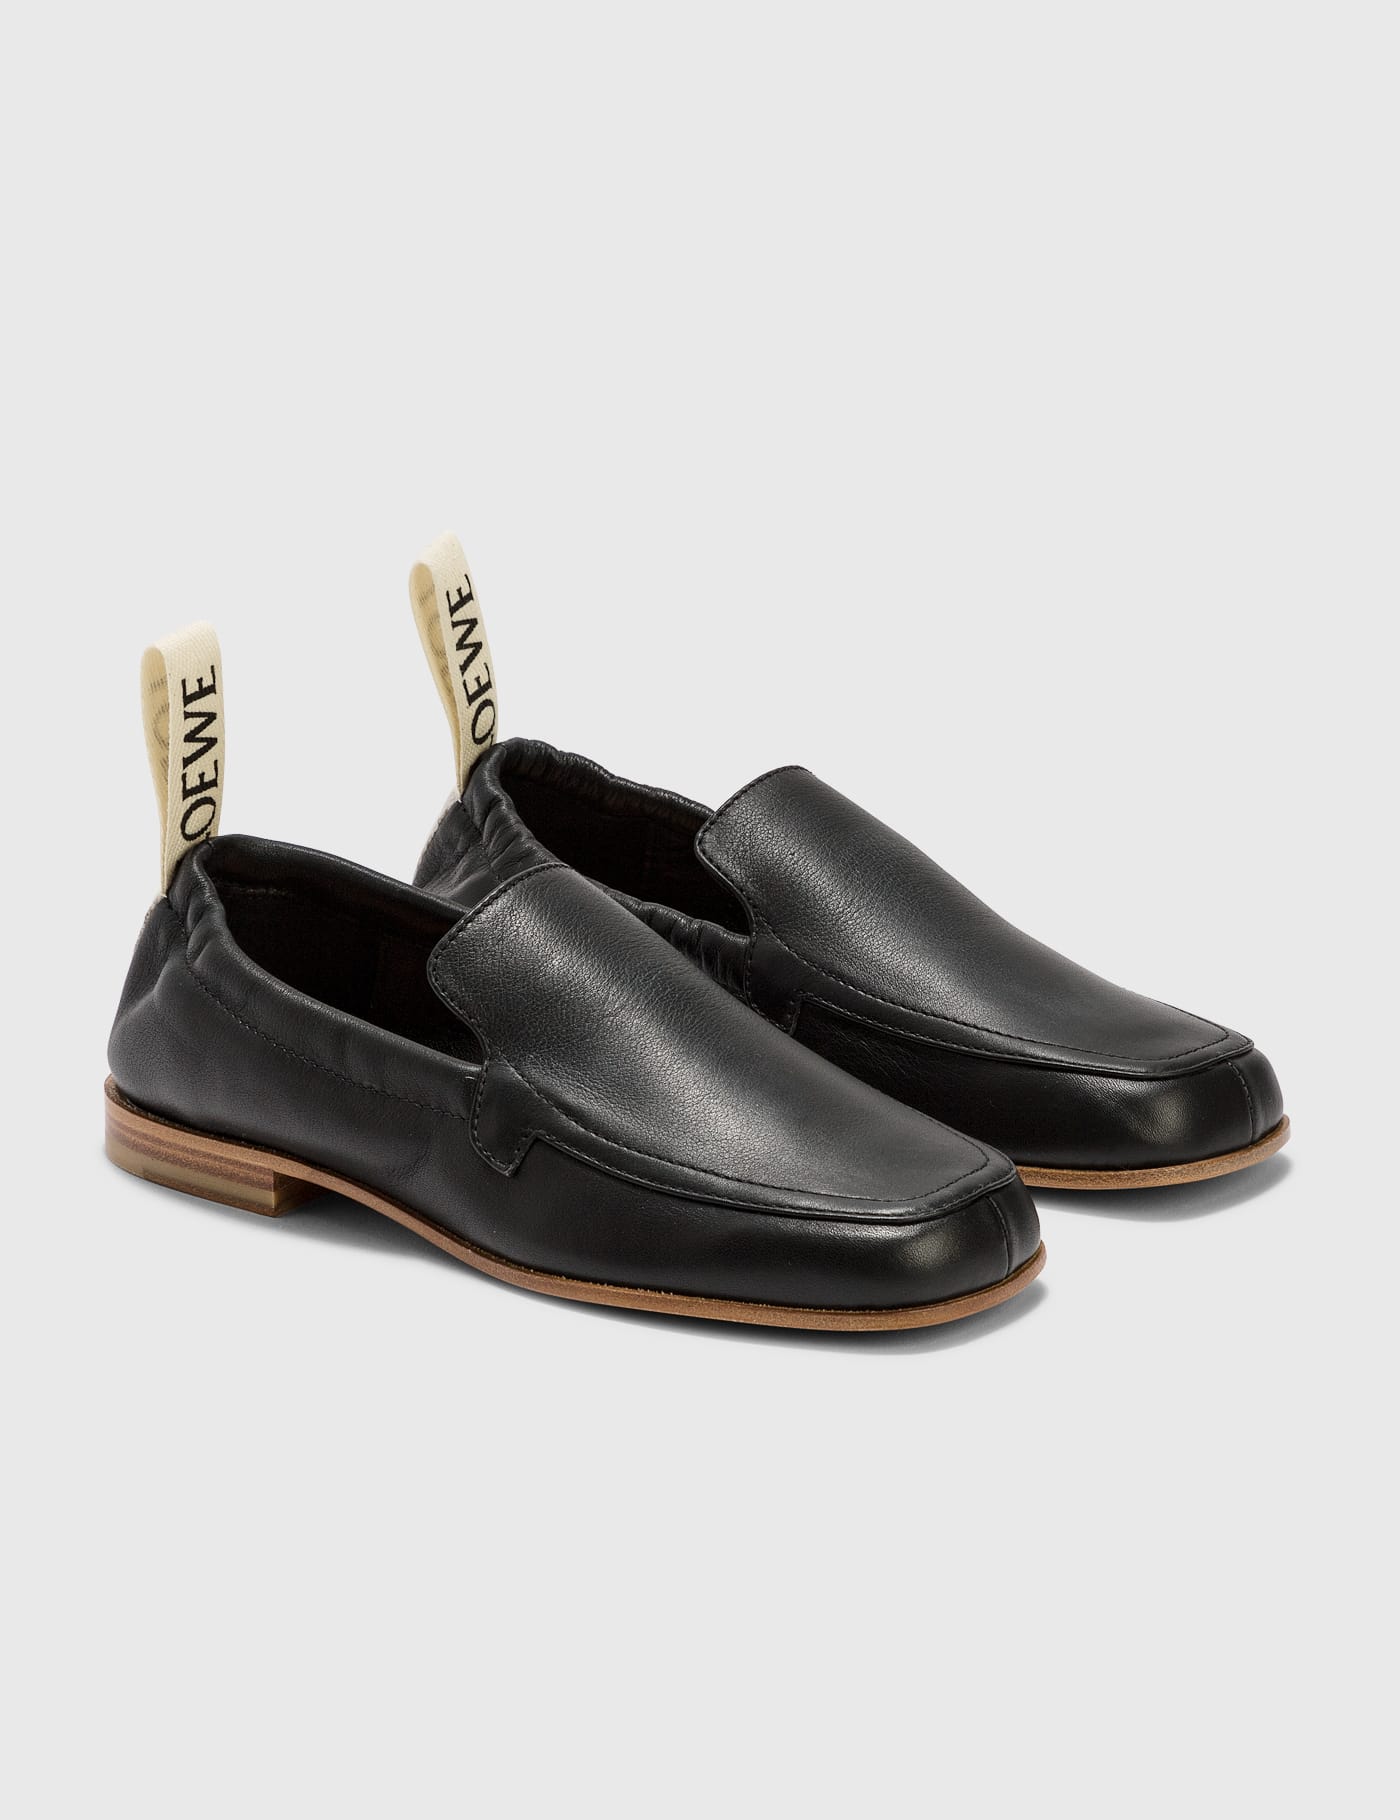 Loewe - Elasticated Loafer | HBX - Globally Curated Fashion and Lifestyle  by Hypebeast